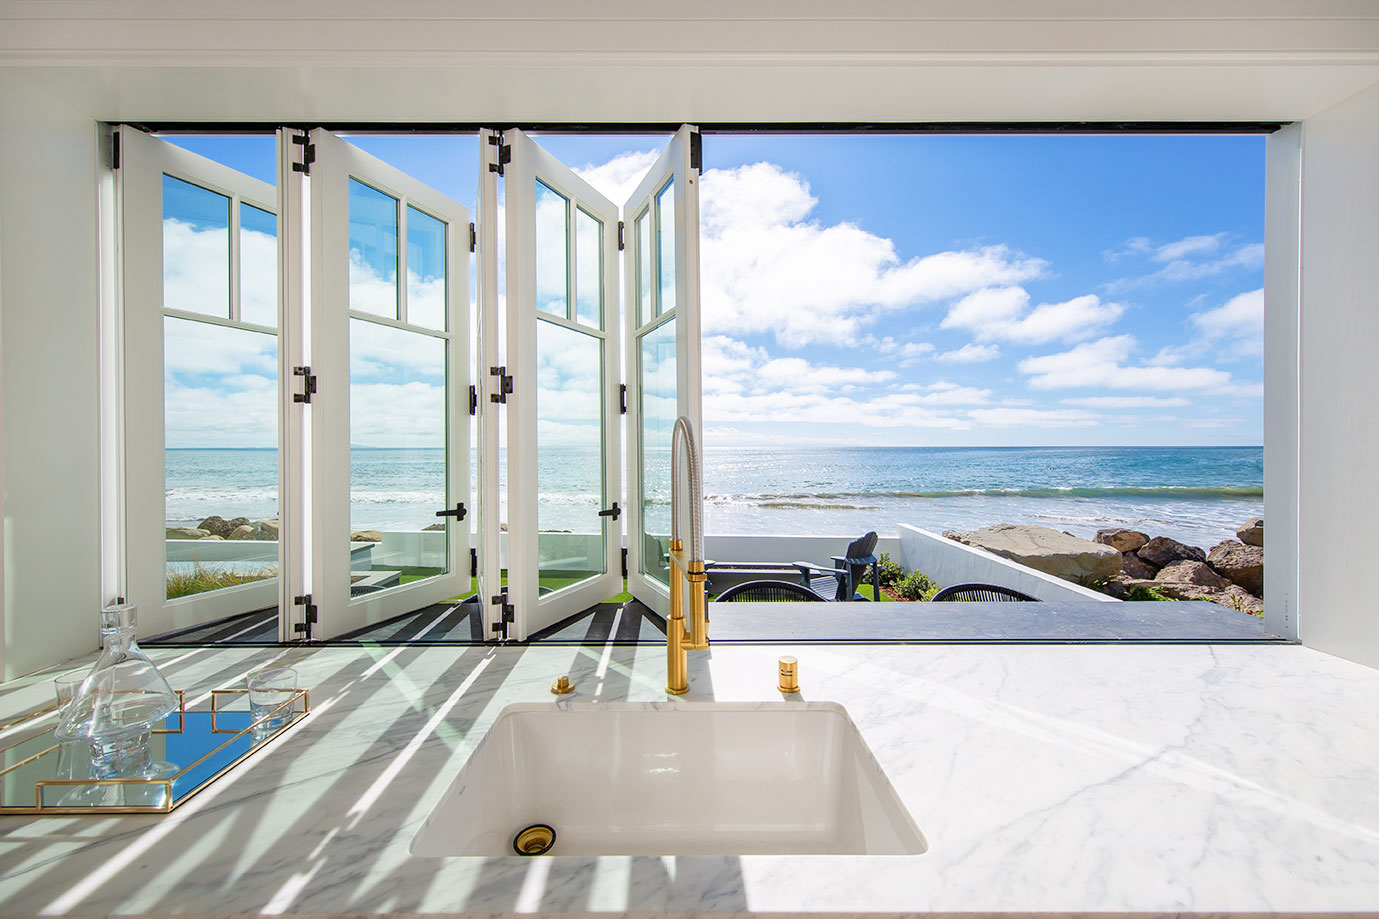 A kitchen sink with a marble countertop is positioned in front of open windows offering a clear view of a sunny beach and ocean.